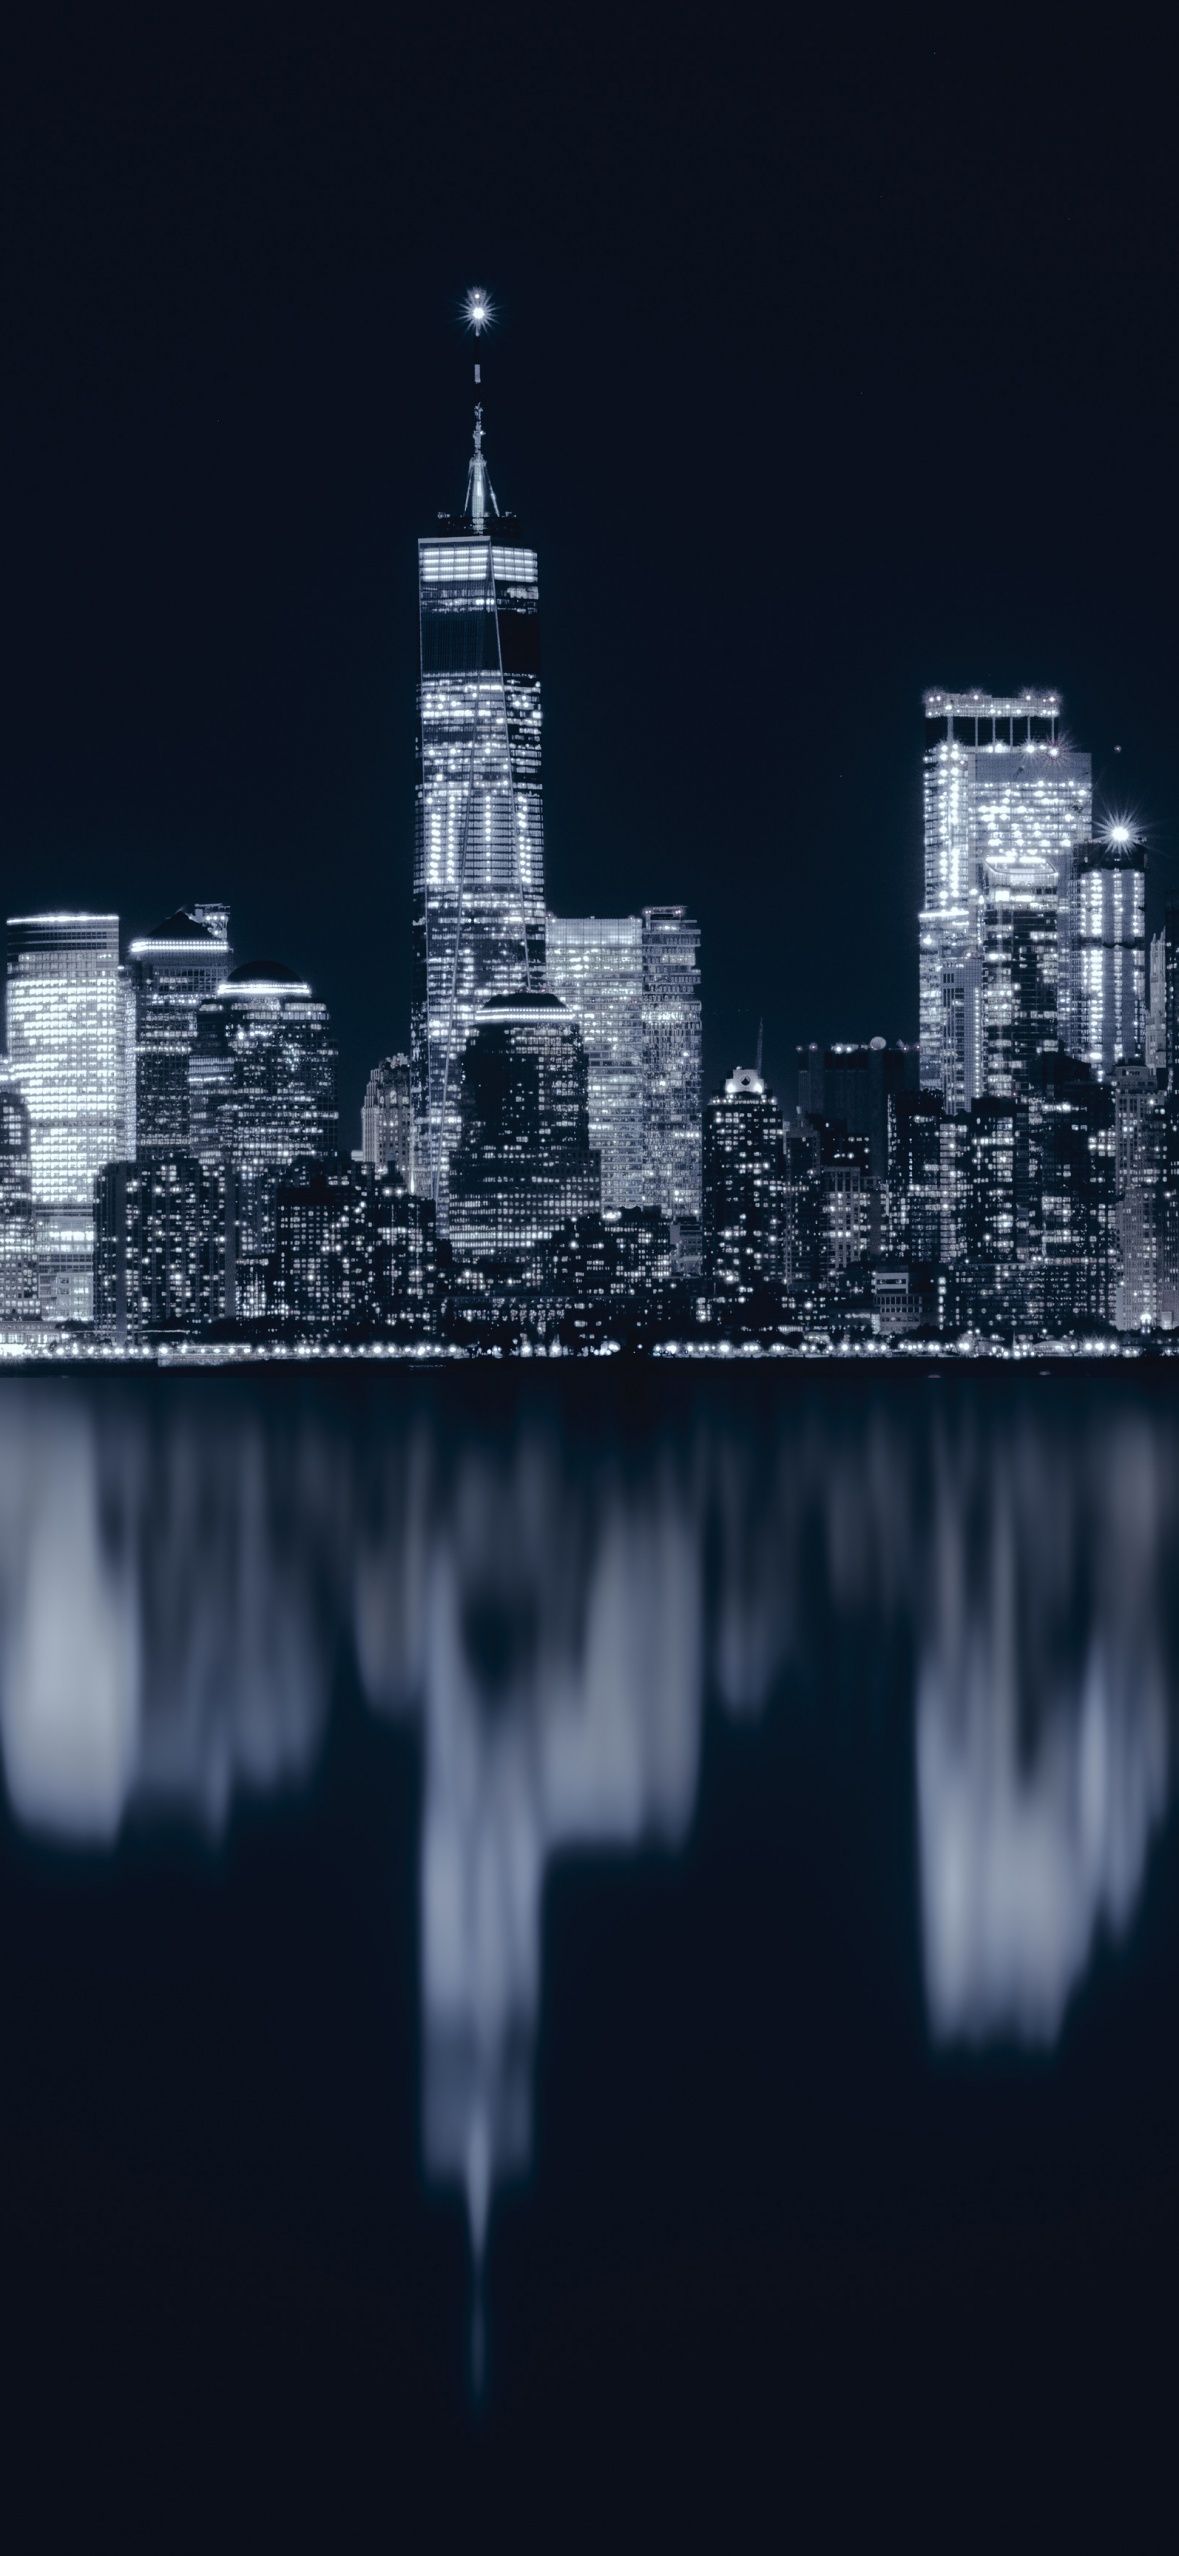 The skyline of a city at night with a reflection in the water. - New York, cityscape